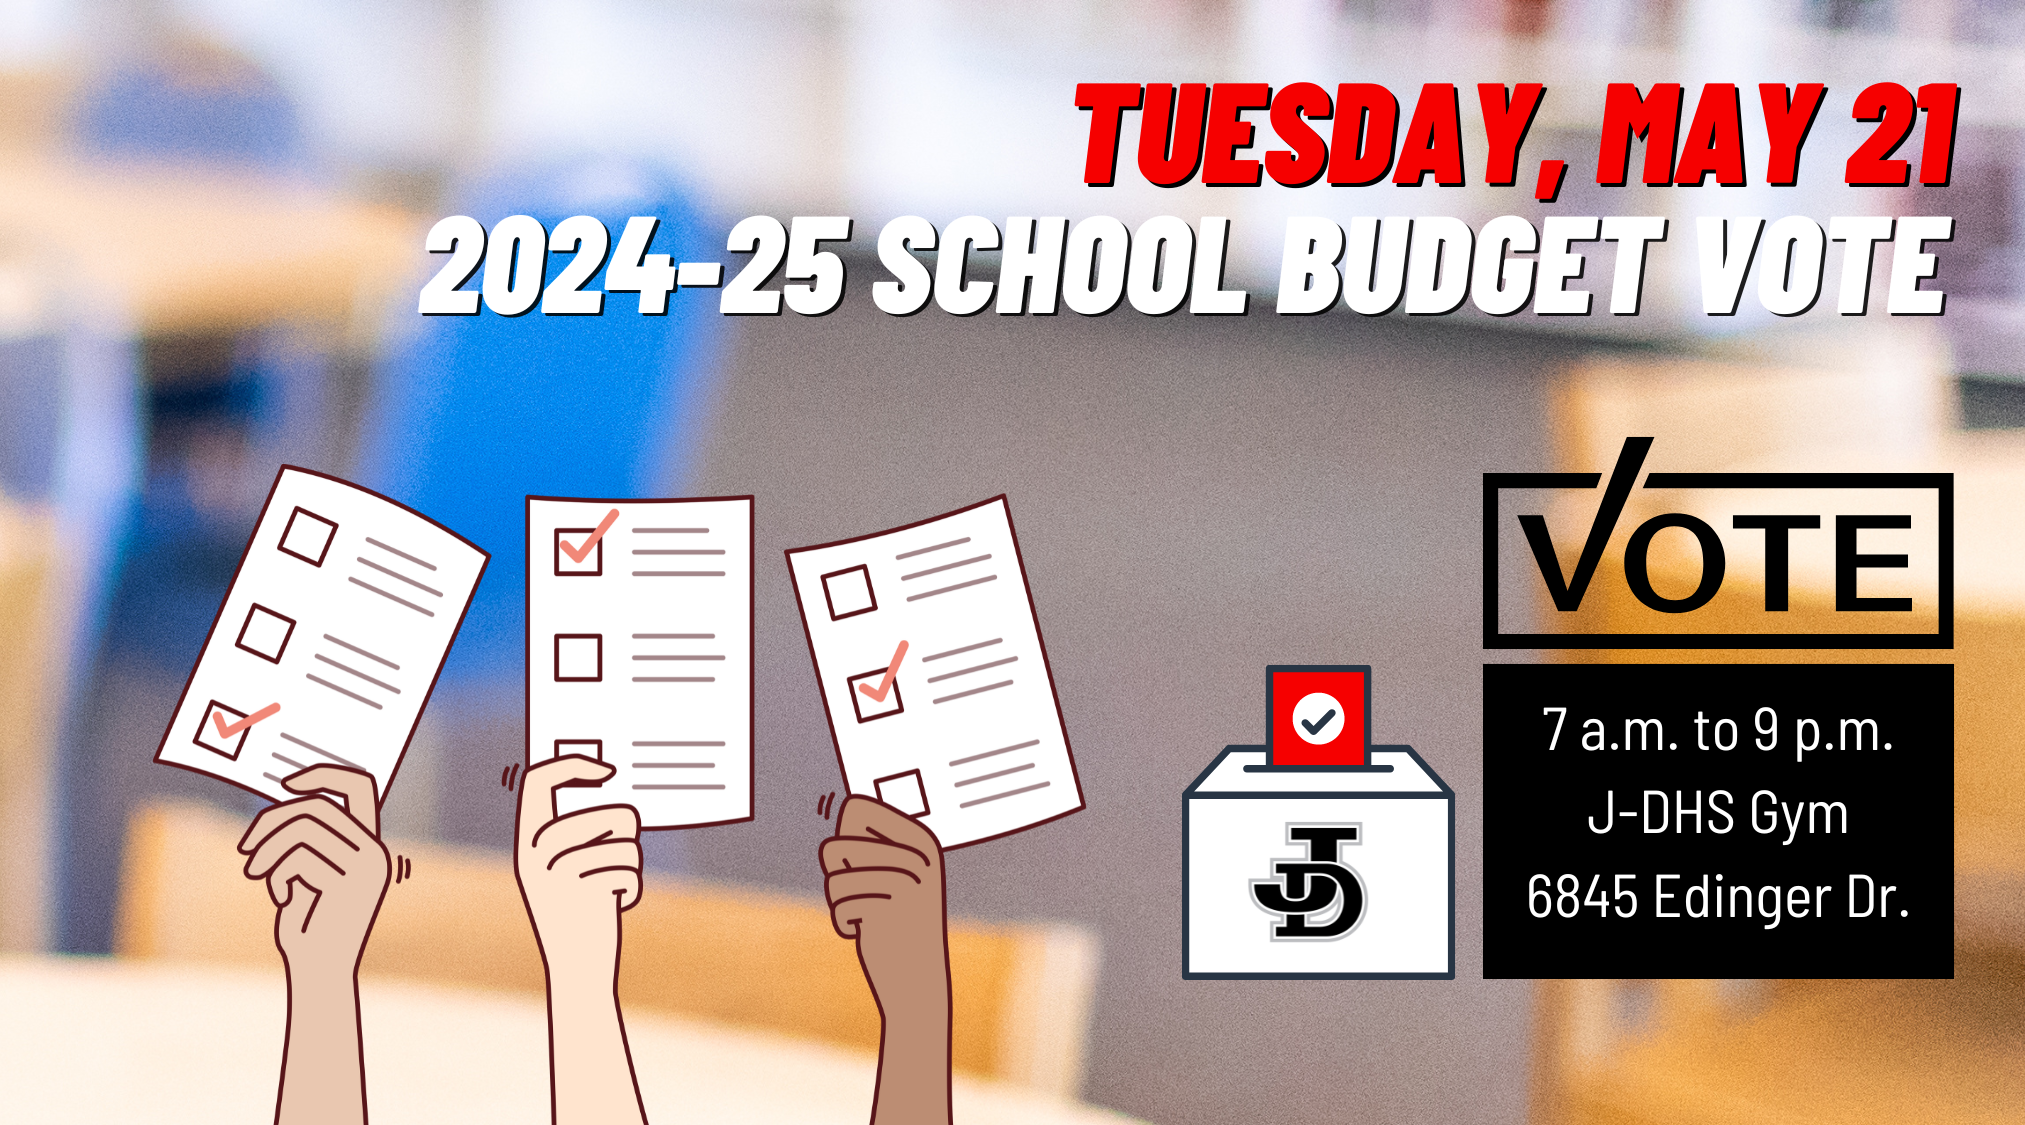 Graphic image with school budget vote date, May 21, and location J-DHS main gym, 7 a.m. to 9 p.m.